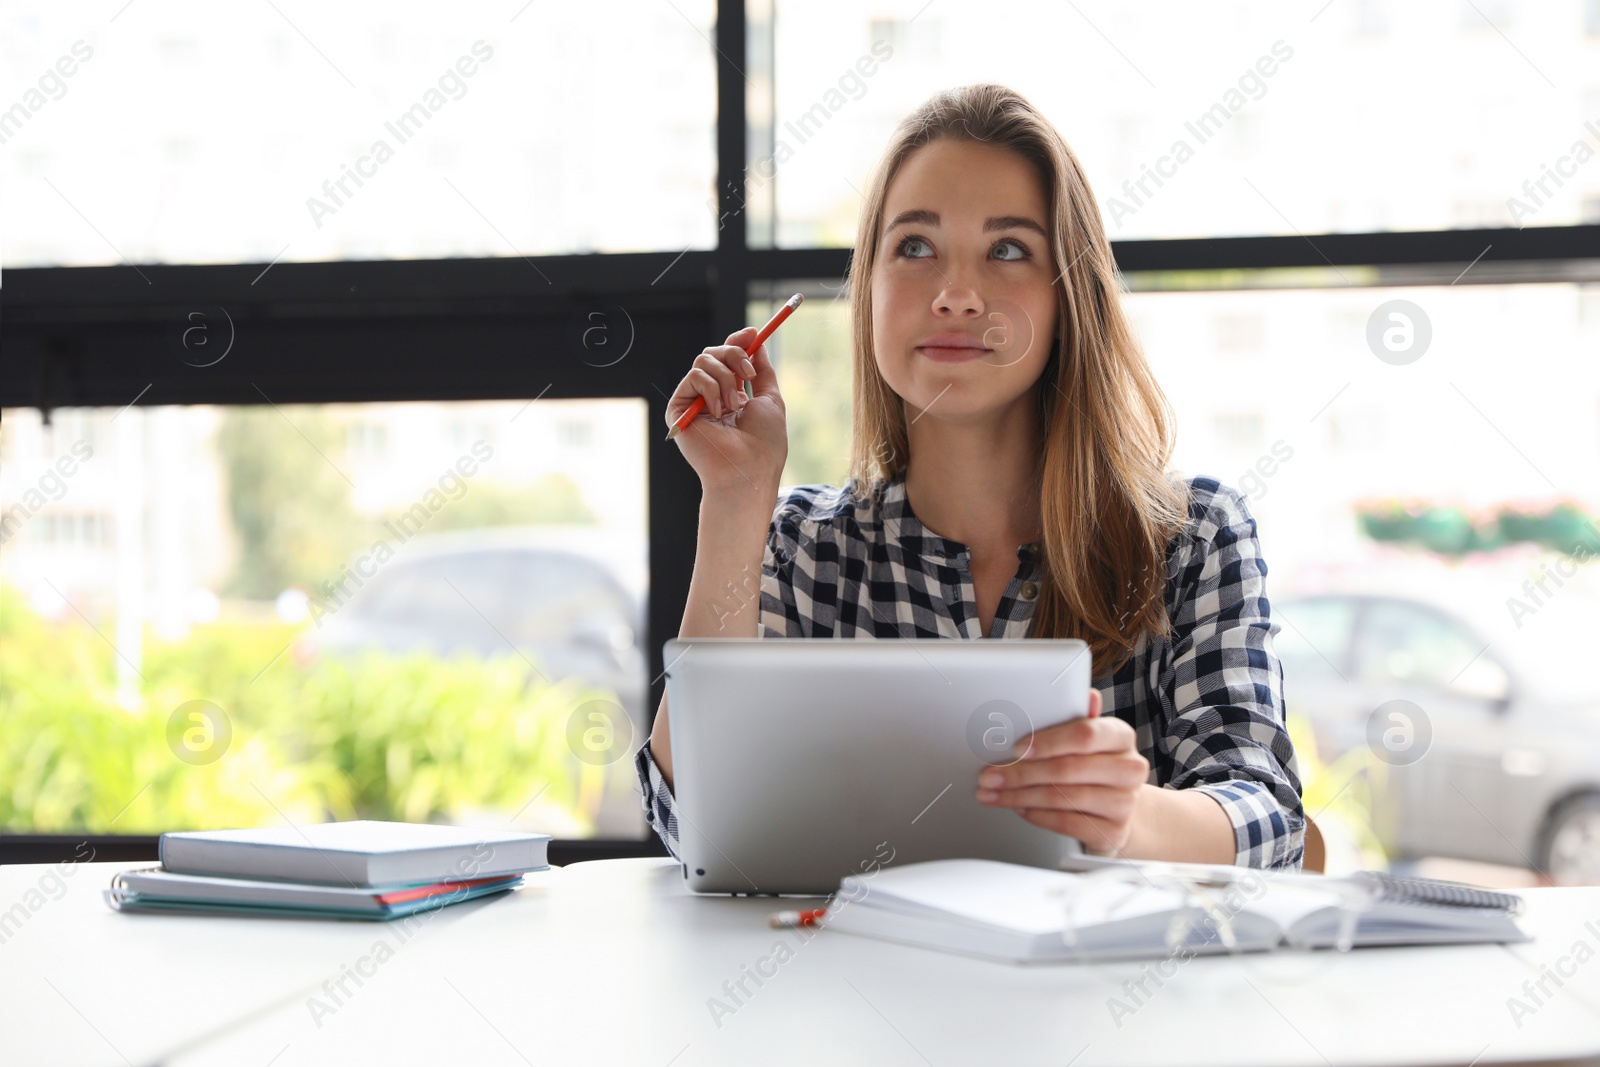 Photo of Pensive young woman studying with tablet at table in library